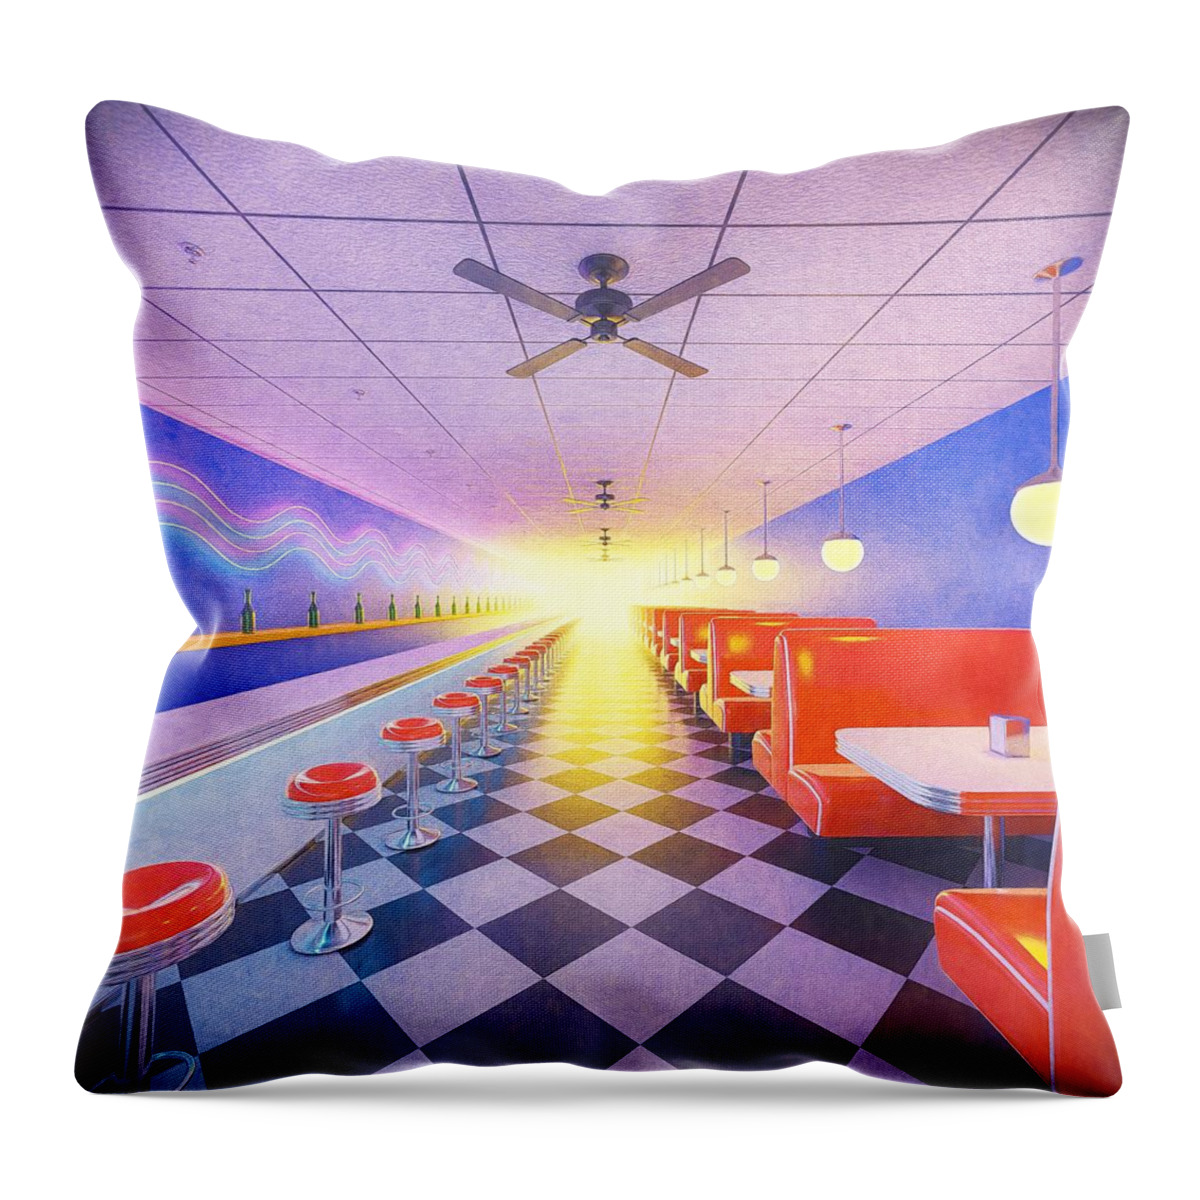 Diner Throw Pillow featuring the digital art Light at the end of the diner by Bespoke Cube